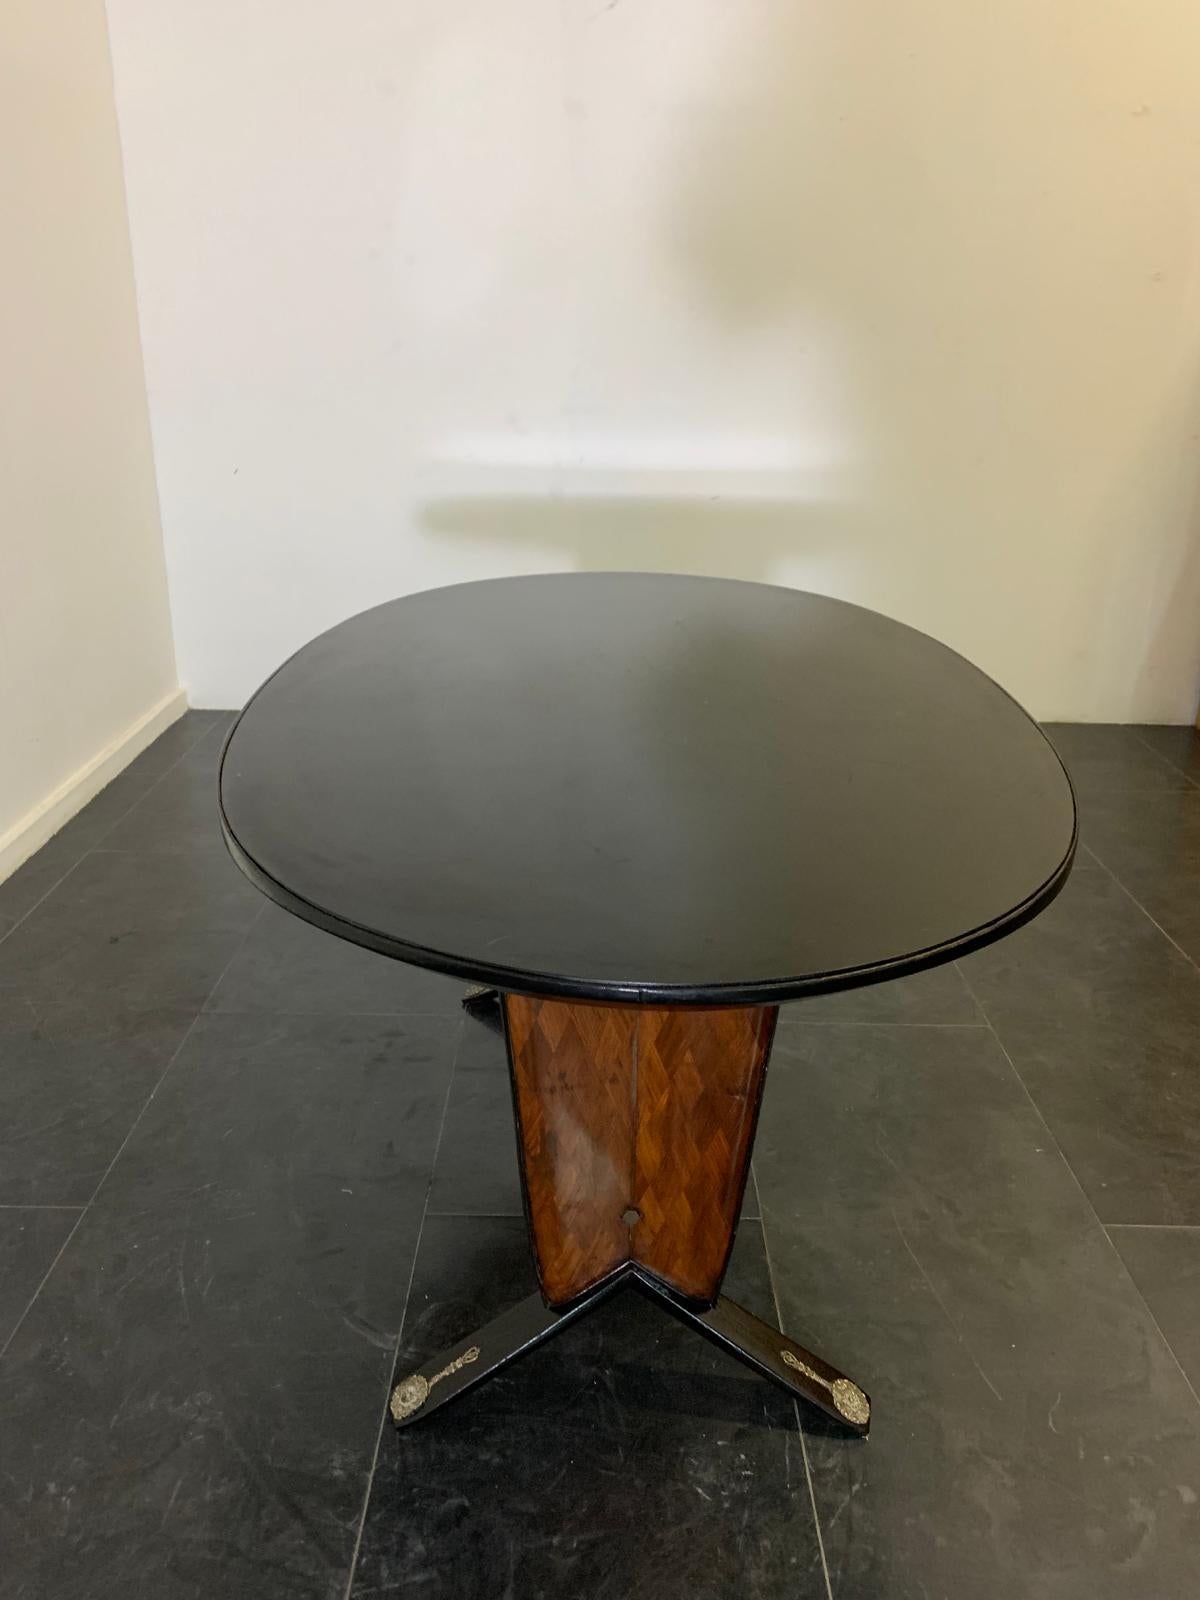 Mid-Century Modern Mid-Century Table with Black Inlays and Mahogany Brass Tips, 1950s For Sale